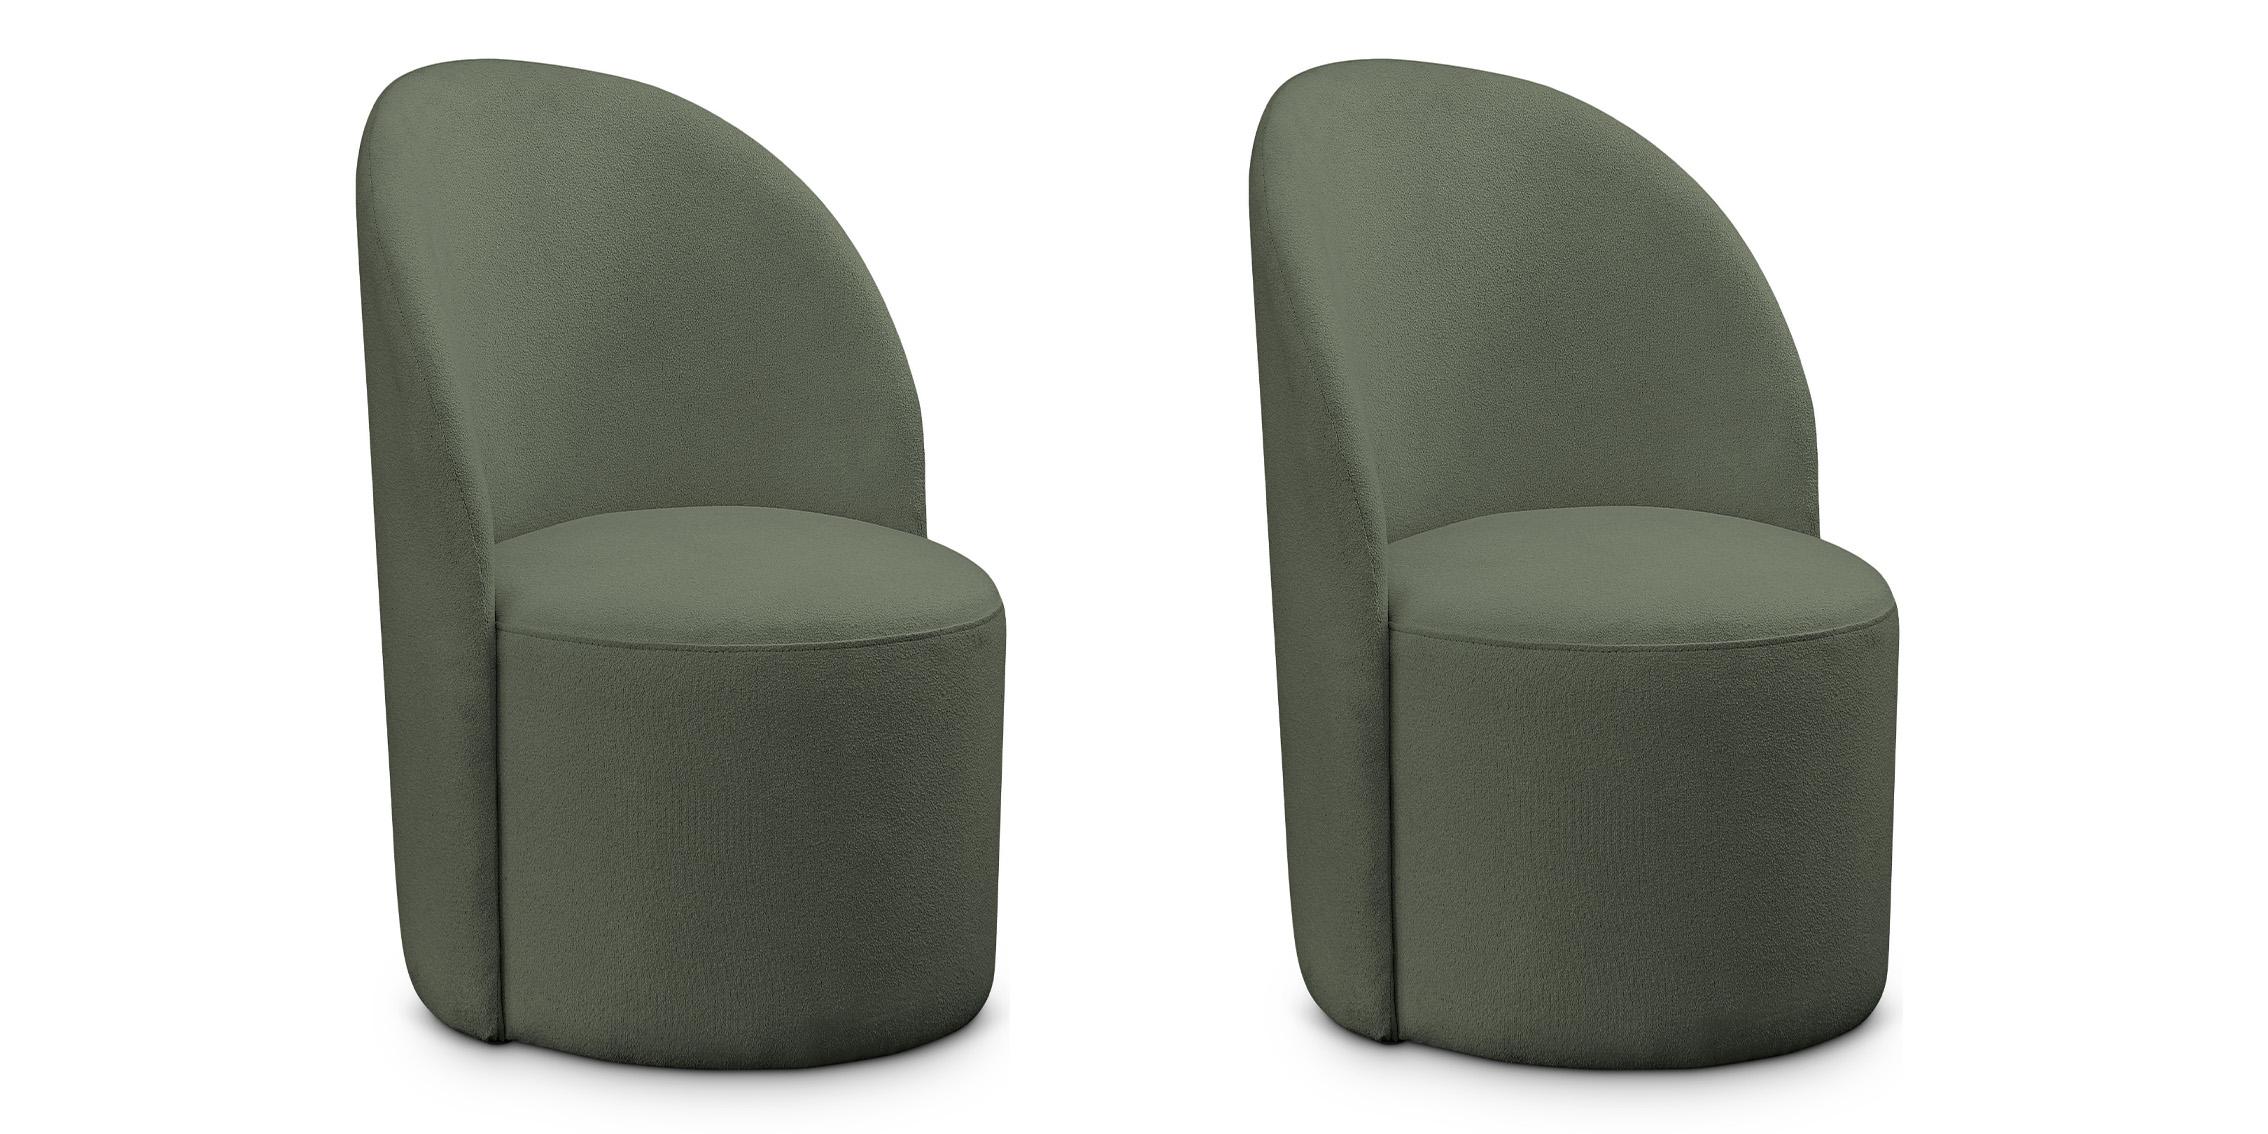 Contemporary, Modern Dining Chair Set HAUTELY 528Green 528Green-Set-2 in Green 